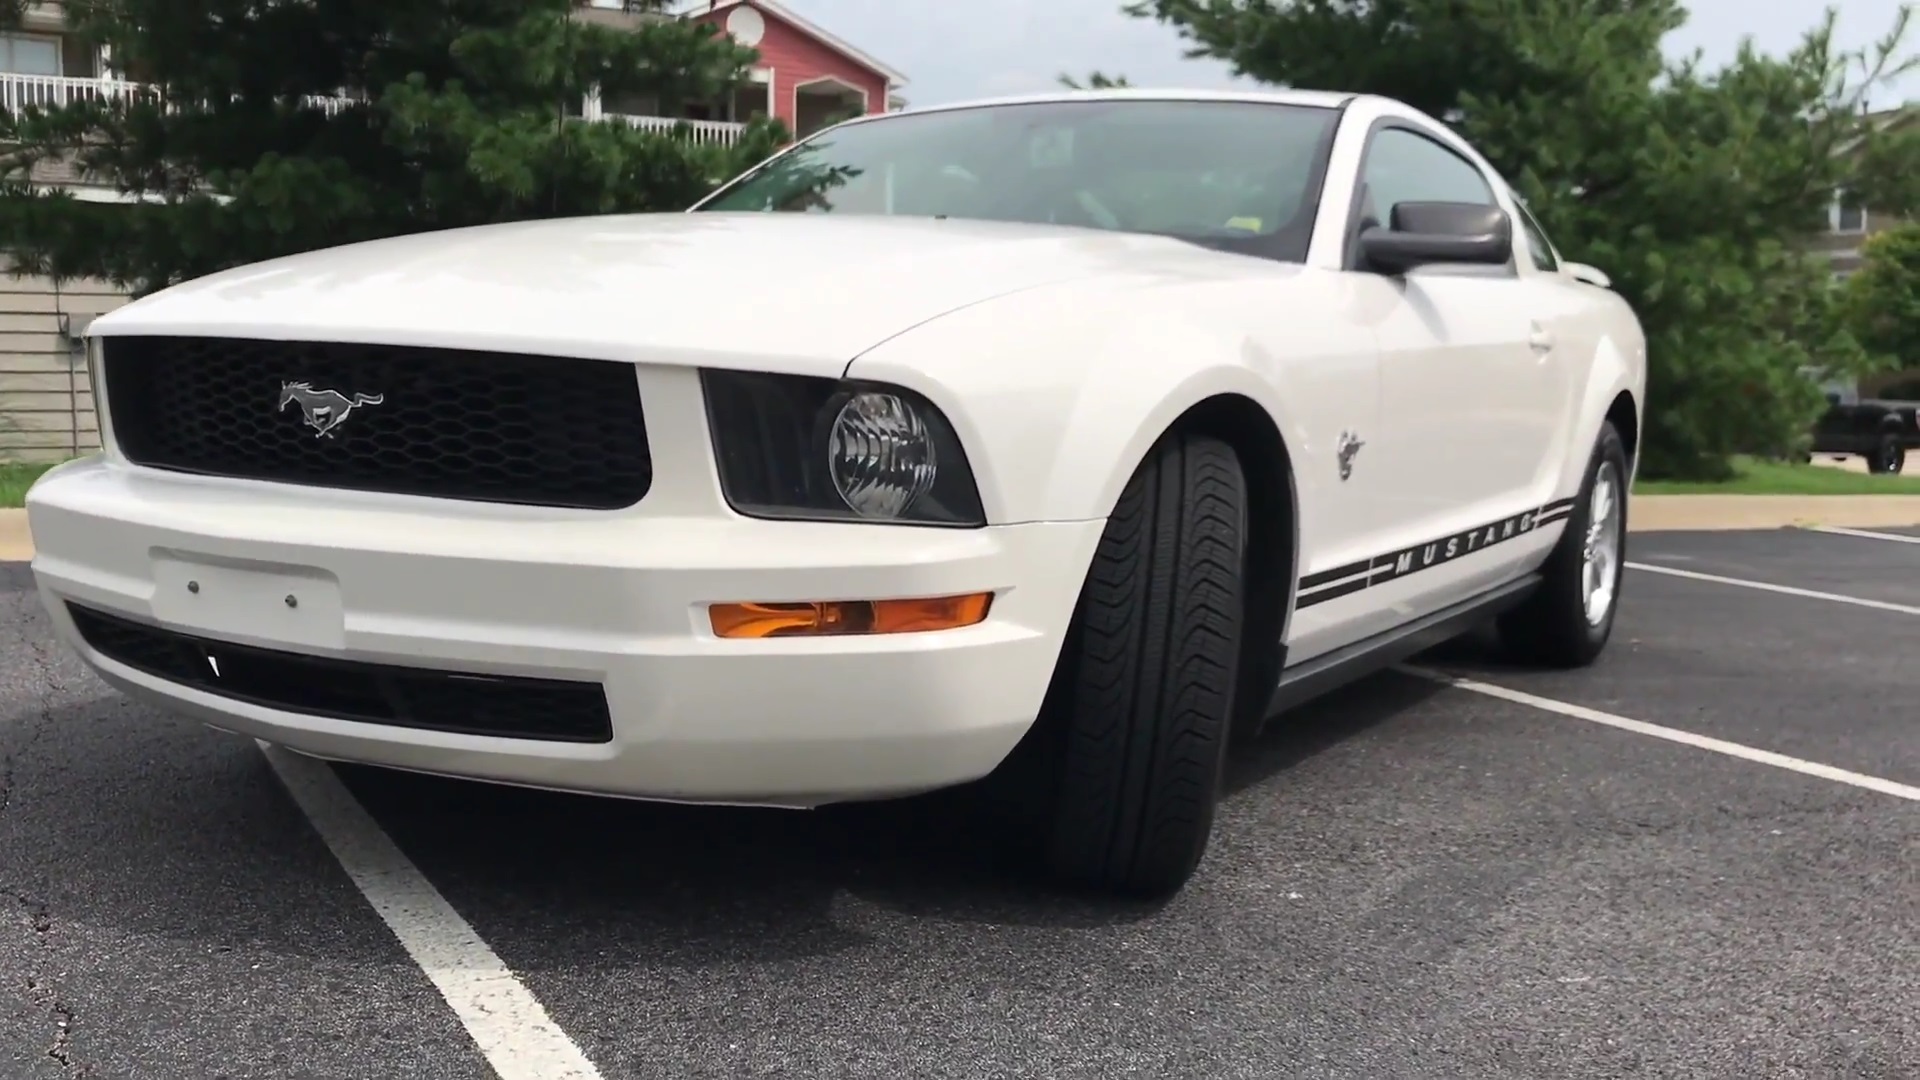 Video: 2009 Ford Mustang In-Depth Review